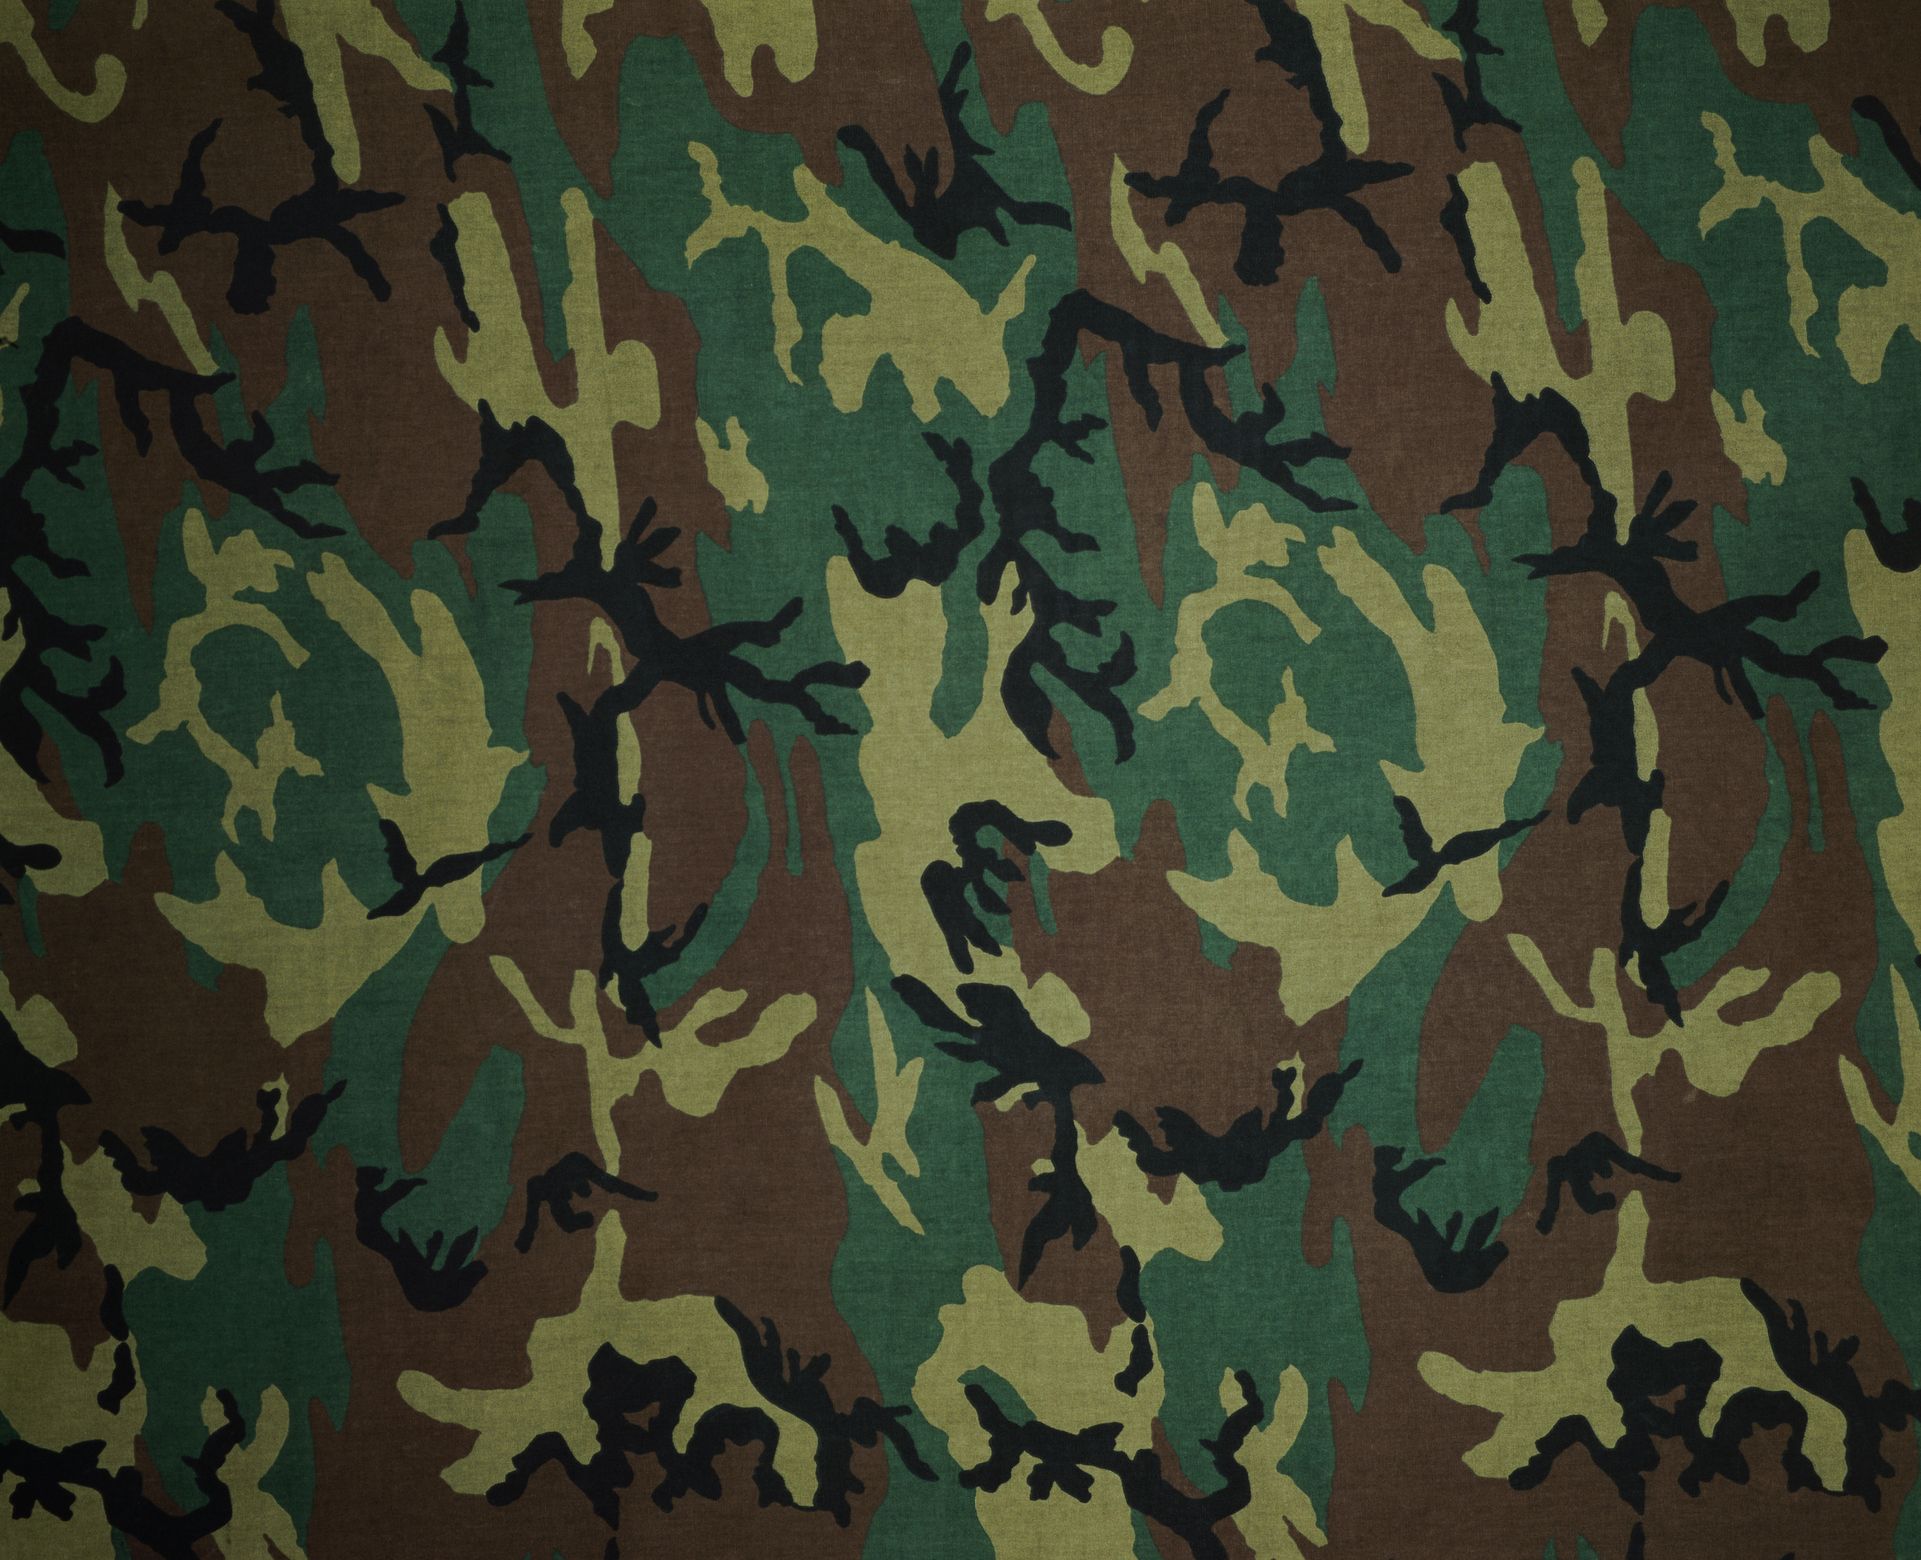 Camouflage Pattern  Camouflage patterns, Camo wallpaper, Camouflage